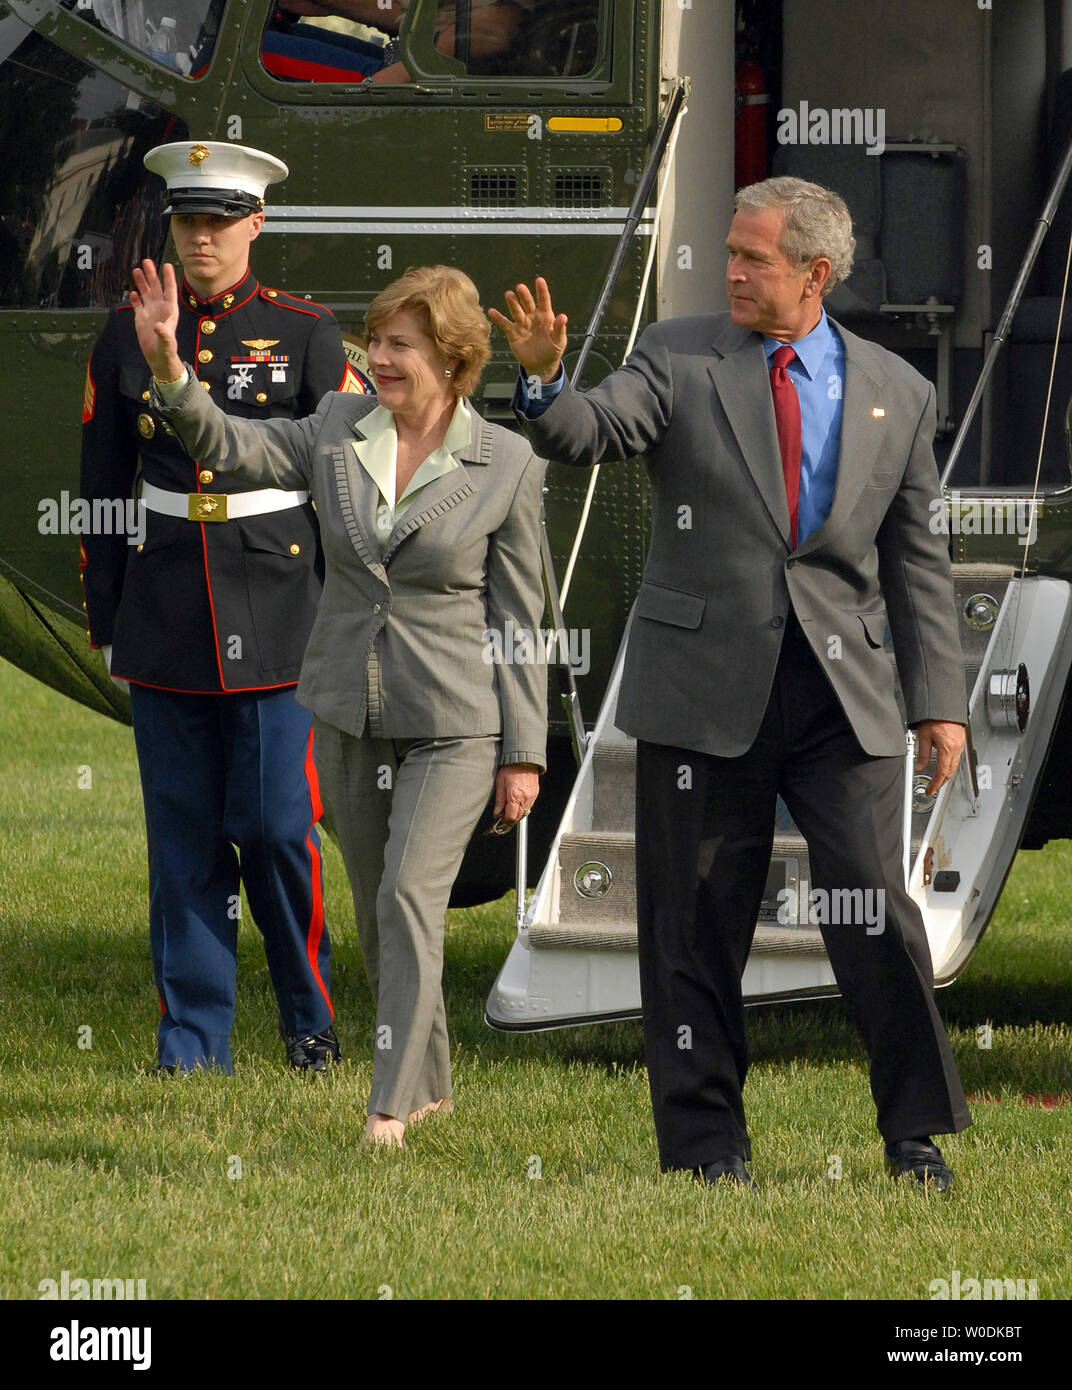 U.S. President George W. Bush and First Lady Laura Bush arrive on the South Lawn of the White House in Washington on May 21, 2007. Bush spent the meeting at his ranch in Crawford, Texas.   (UPI Photo/Roger L. Wollenberg) Stock Photo